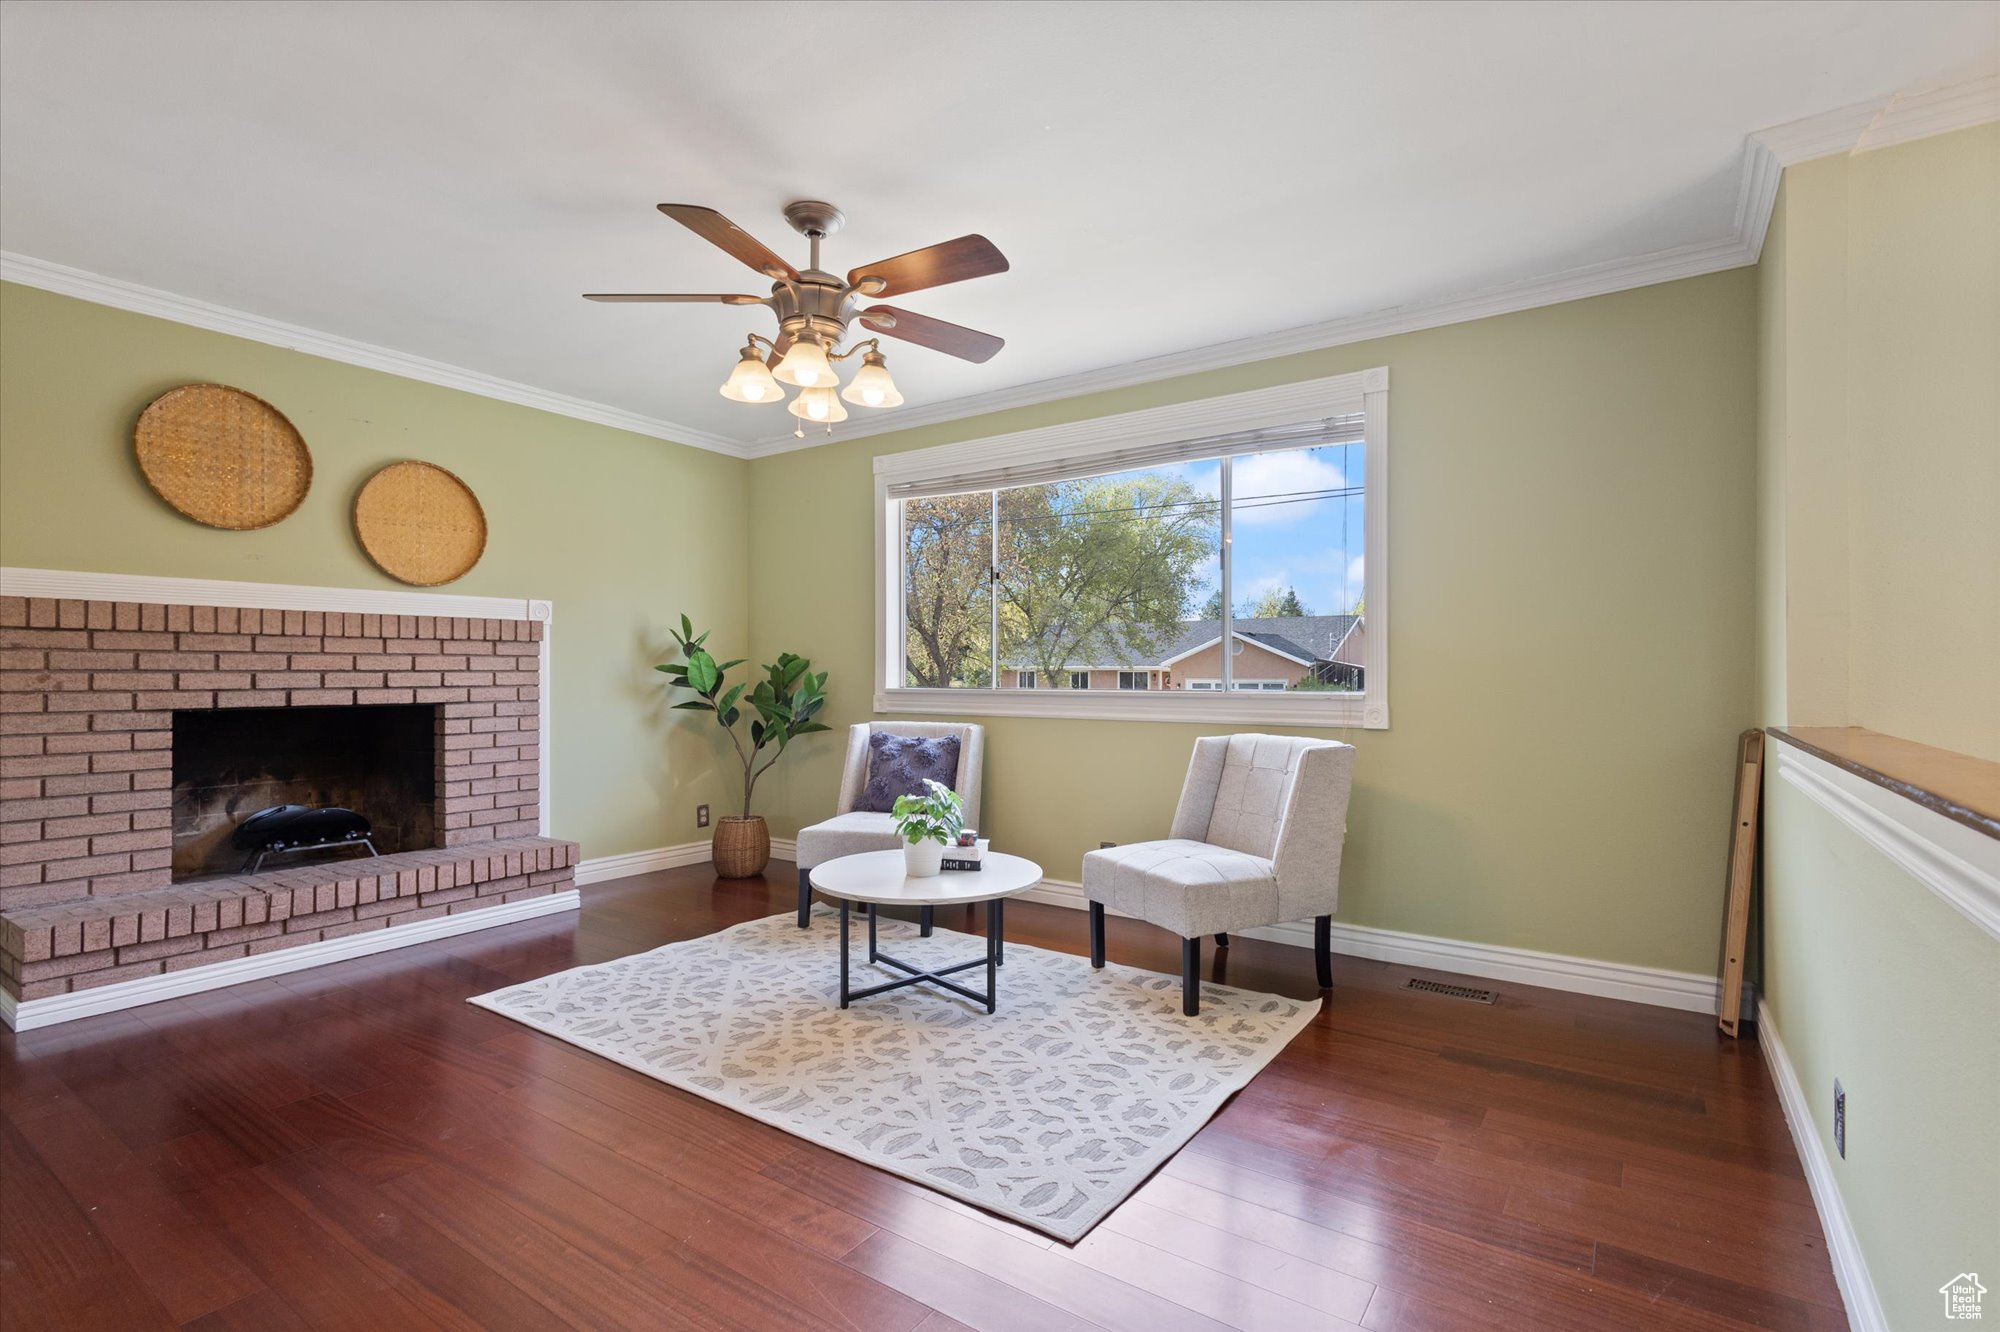 Sitting room featuring ceiling fan, a fireplace, dark wood-type flooring, and crown molding